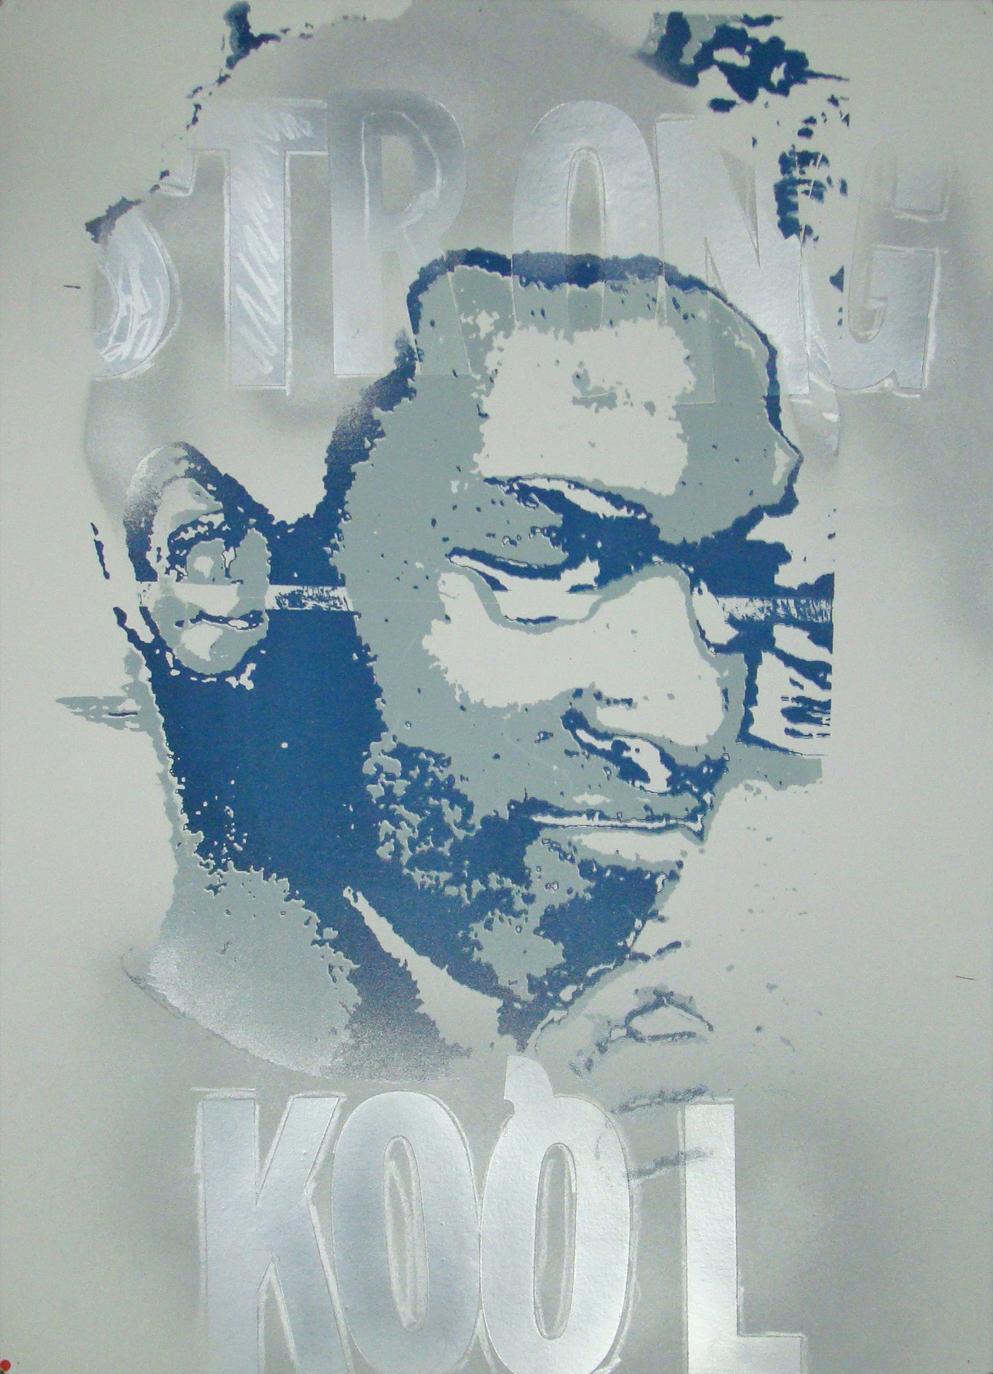 Tavon Green and Anne Brennan, Strong is Kool, 2010, 30 x 22, Vinyl letters, spray paint, oil pastel and screenprint on paper. Collection of The Gate of Kinston. Gift of Greg and Margaret Smith.